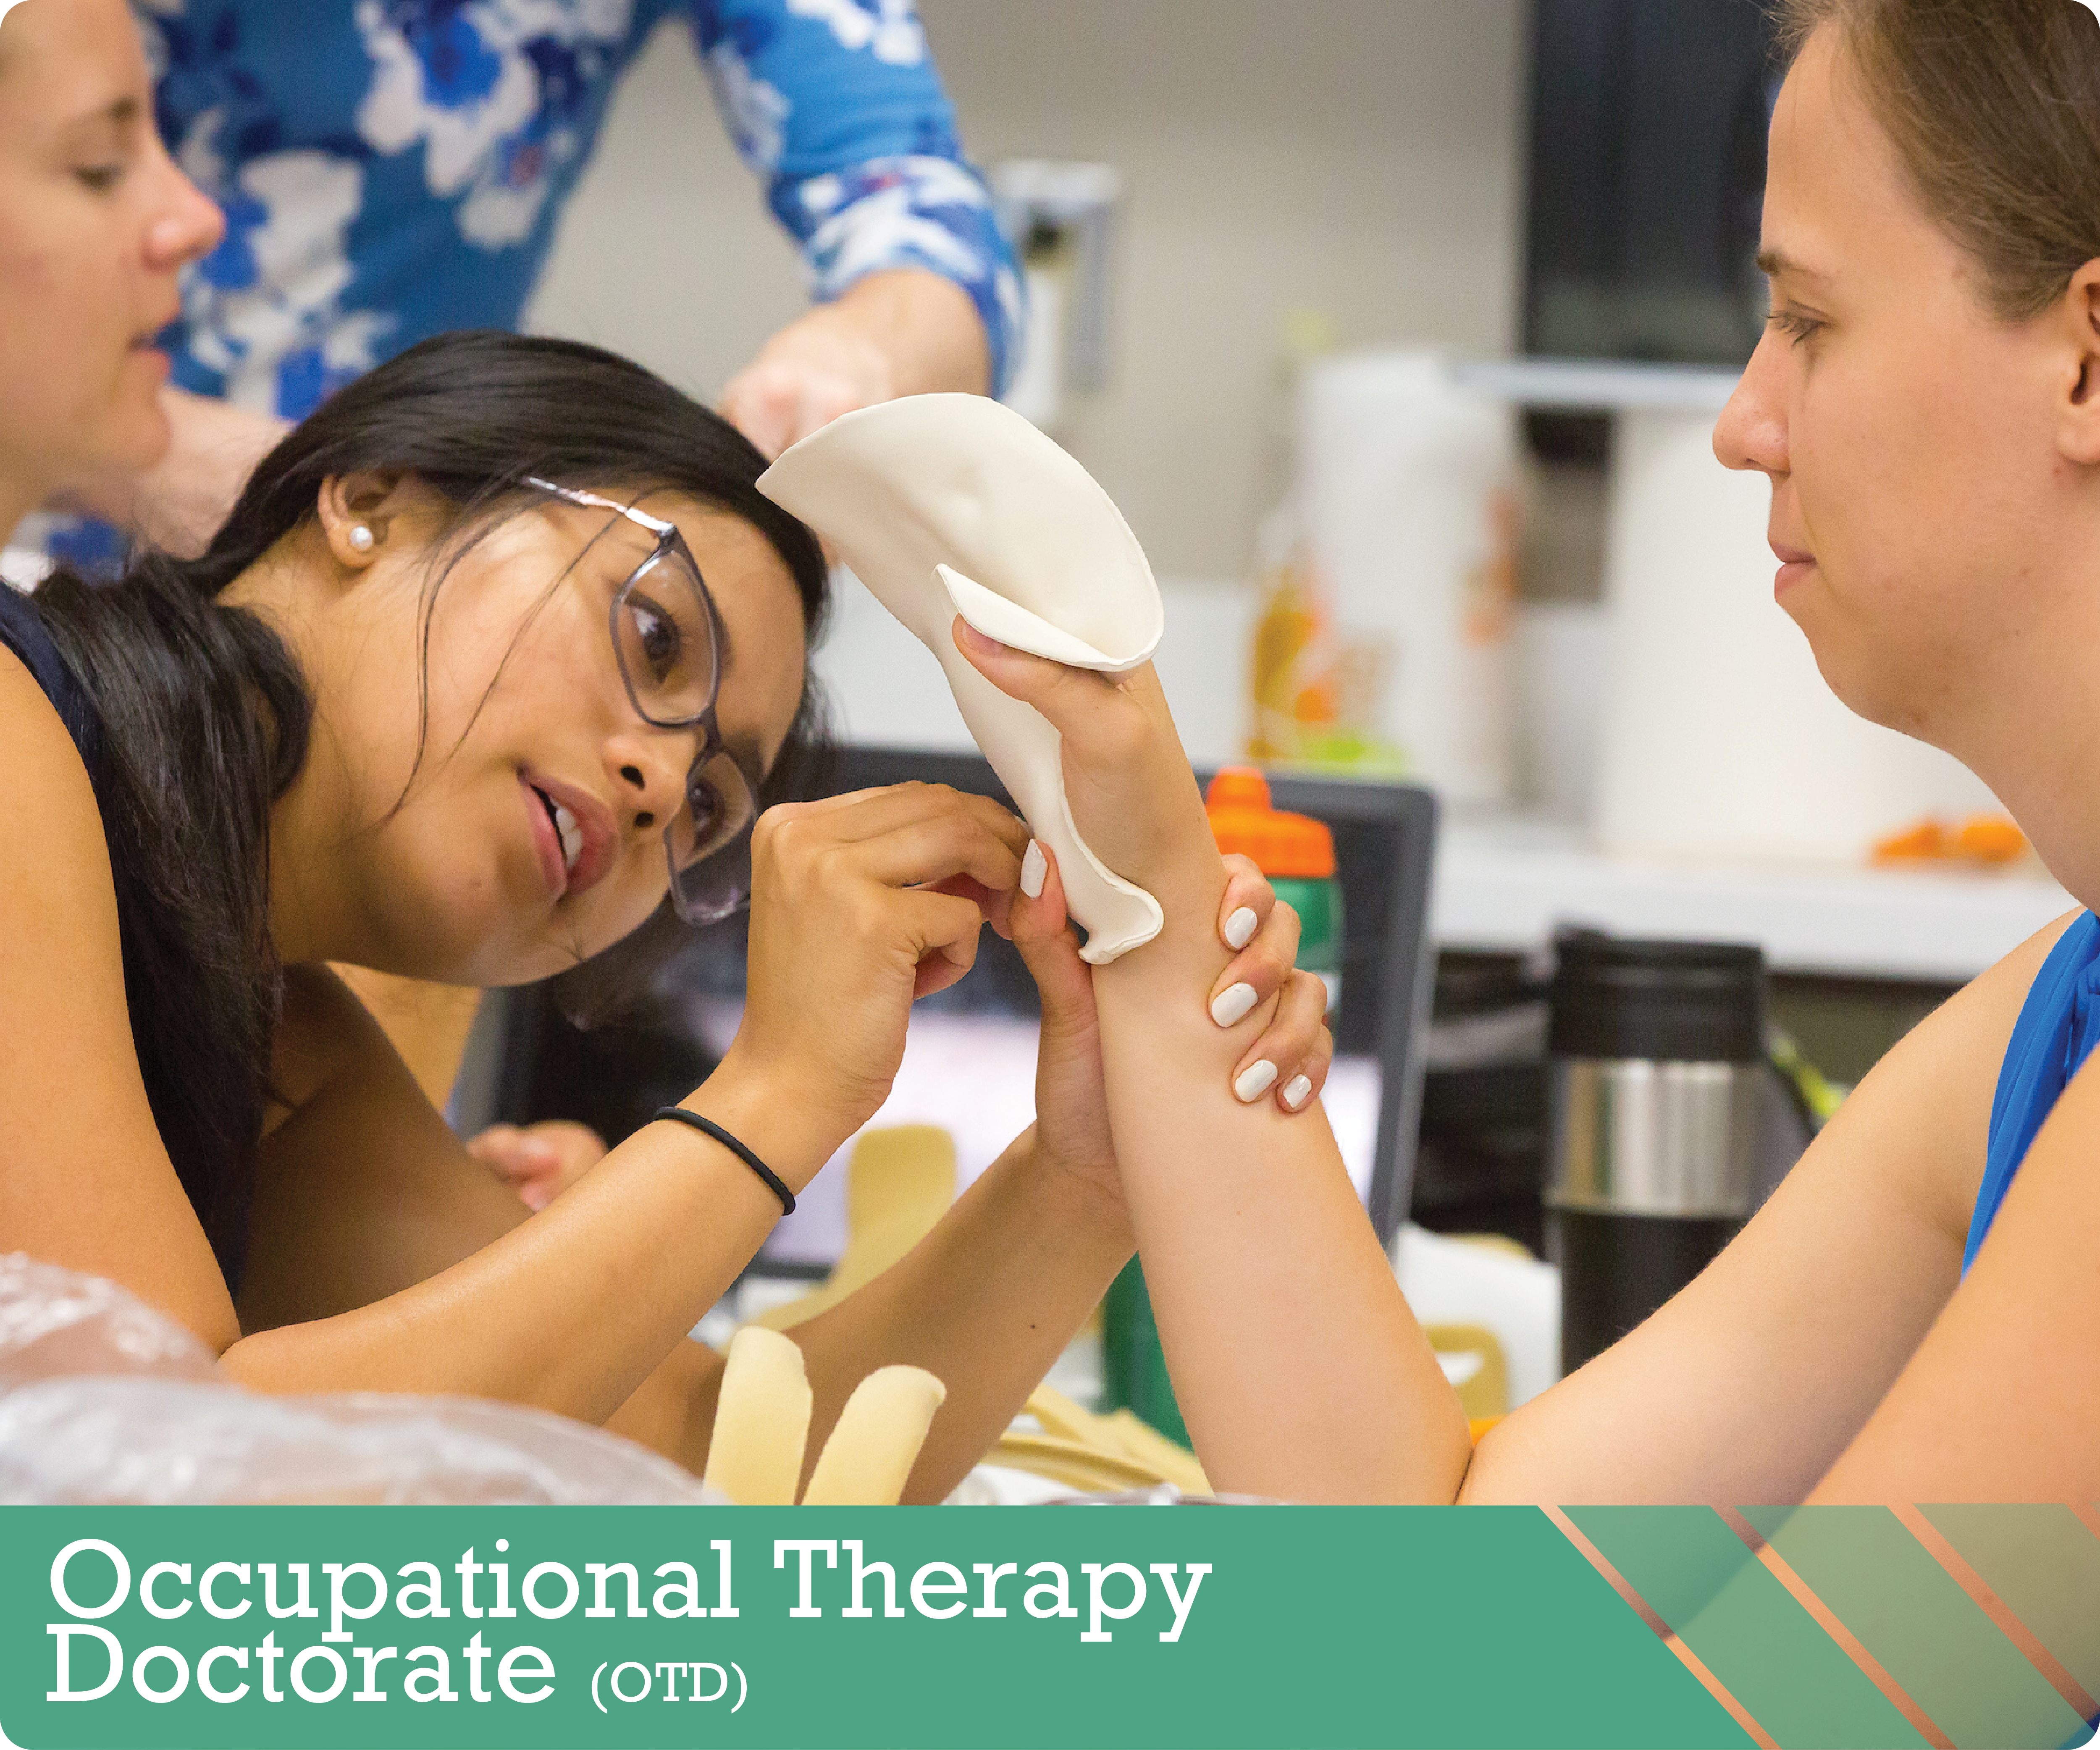 Occupational Therapy Doctorate